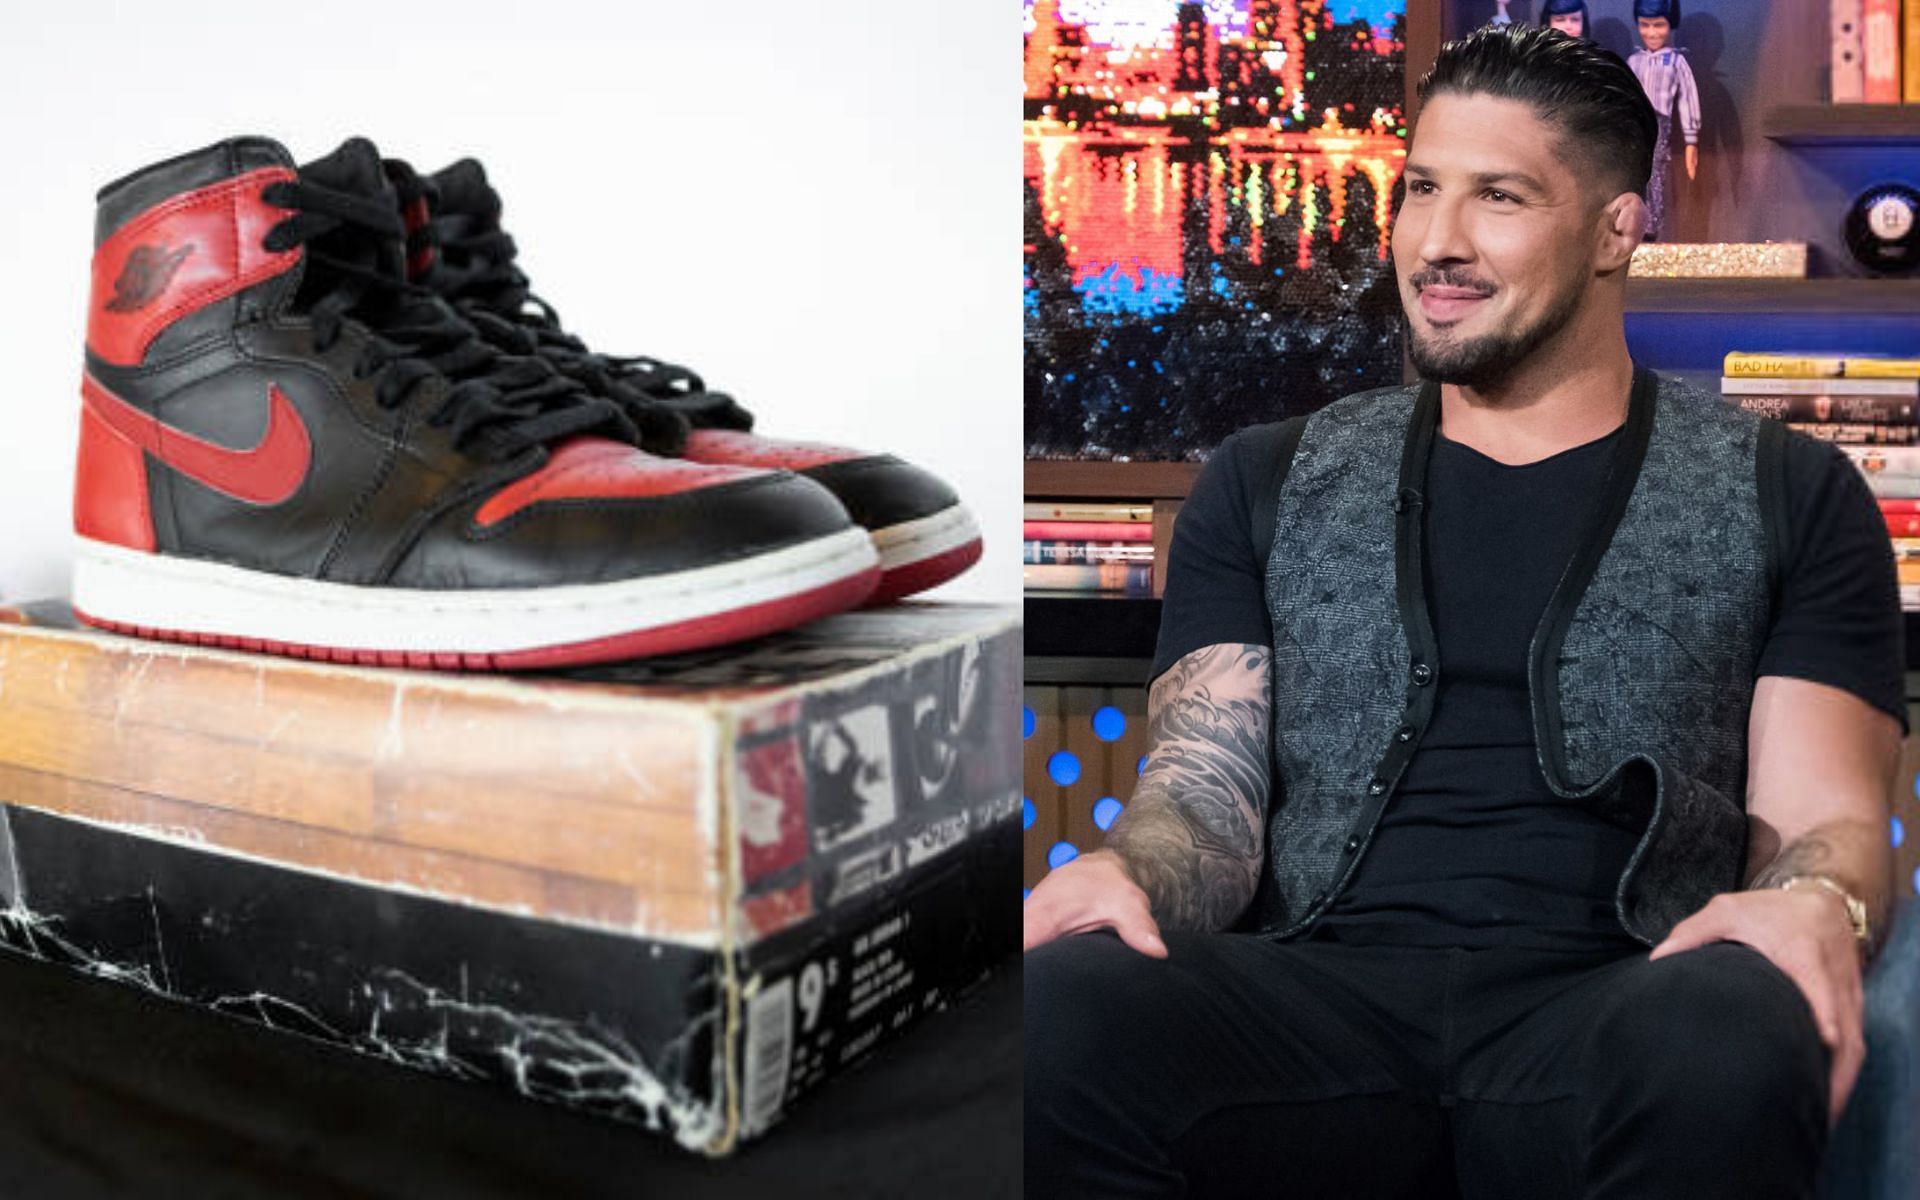 UFC heavyweight contender thanks Brendan Schaub for gifting him shoes that actually fit him